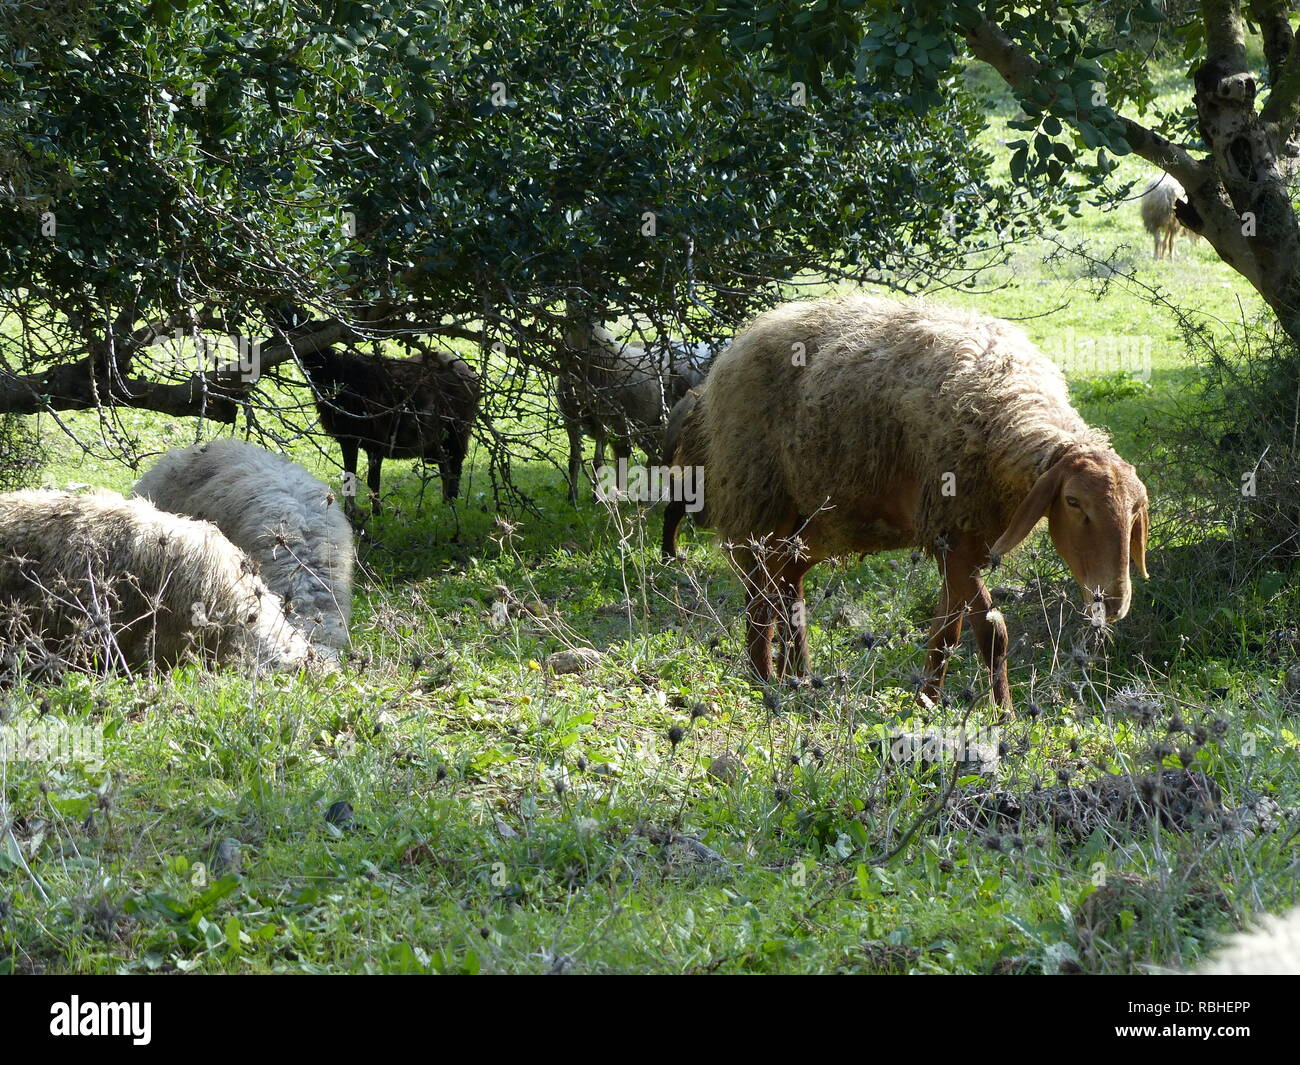 A herd of sheep grazes in a green field pasture Photographed in Israel in January Stock Photo